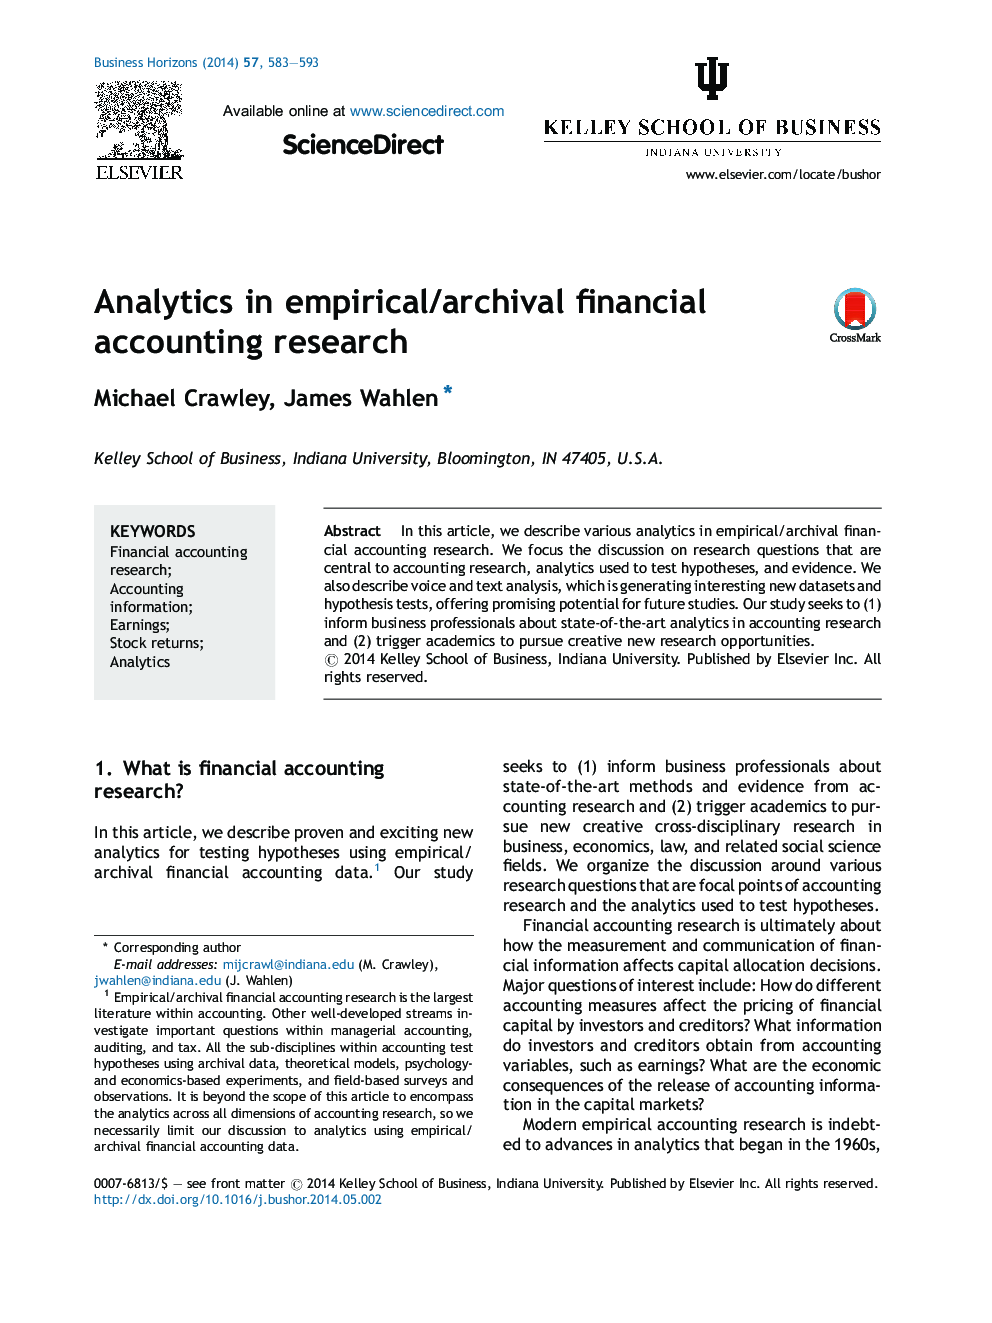 Analytics in empirical/archival financial accounting research